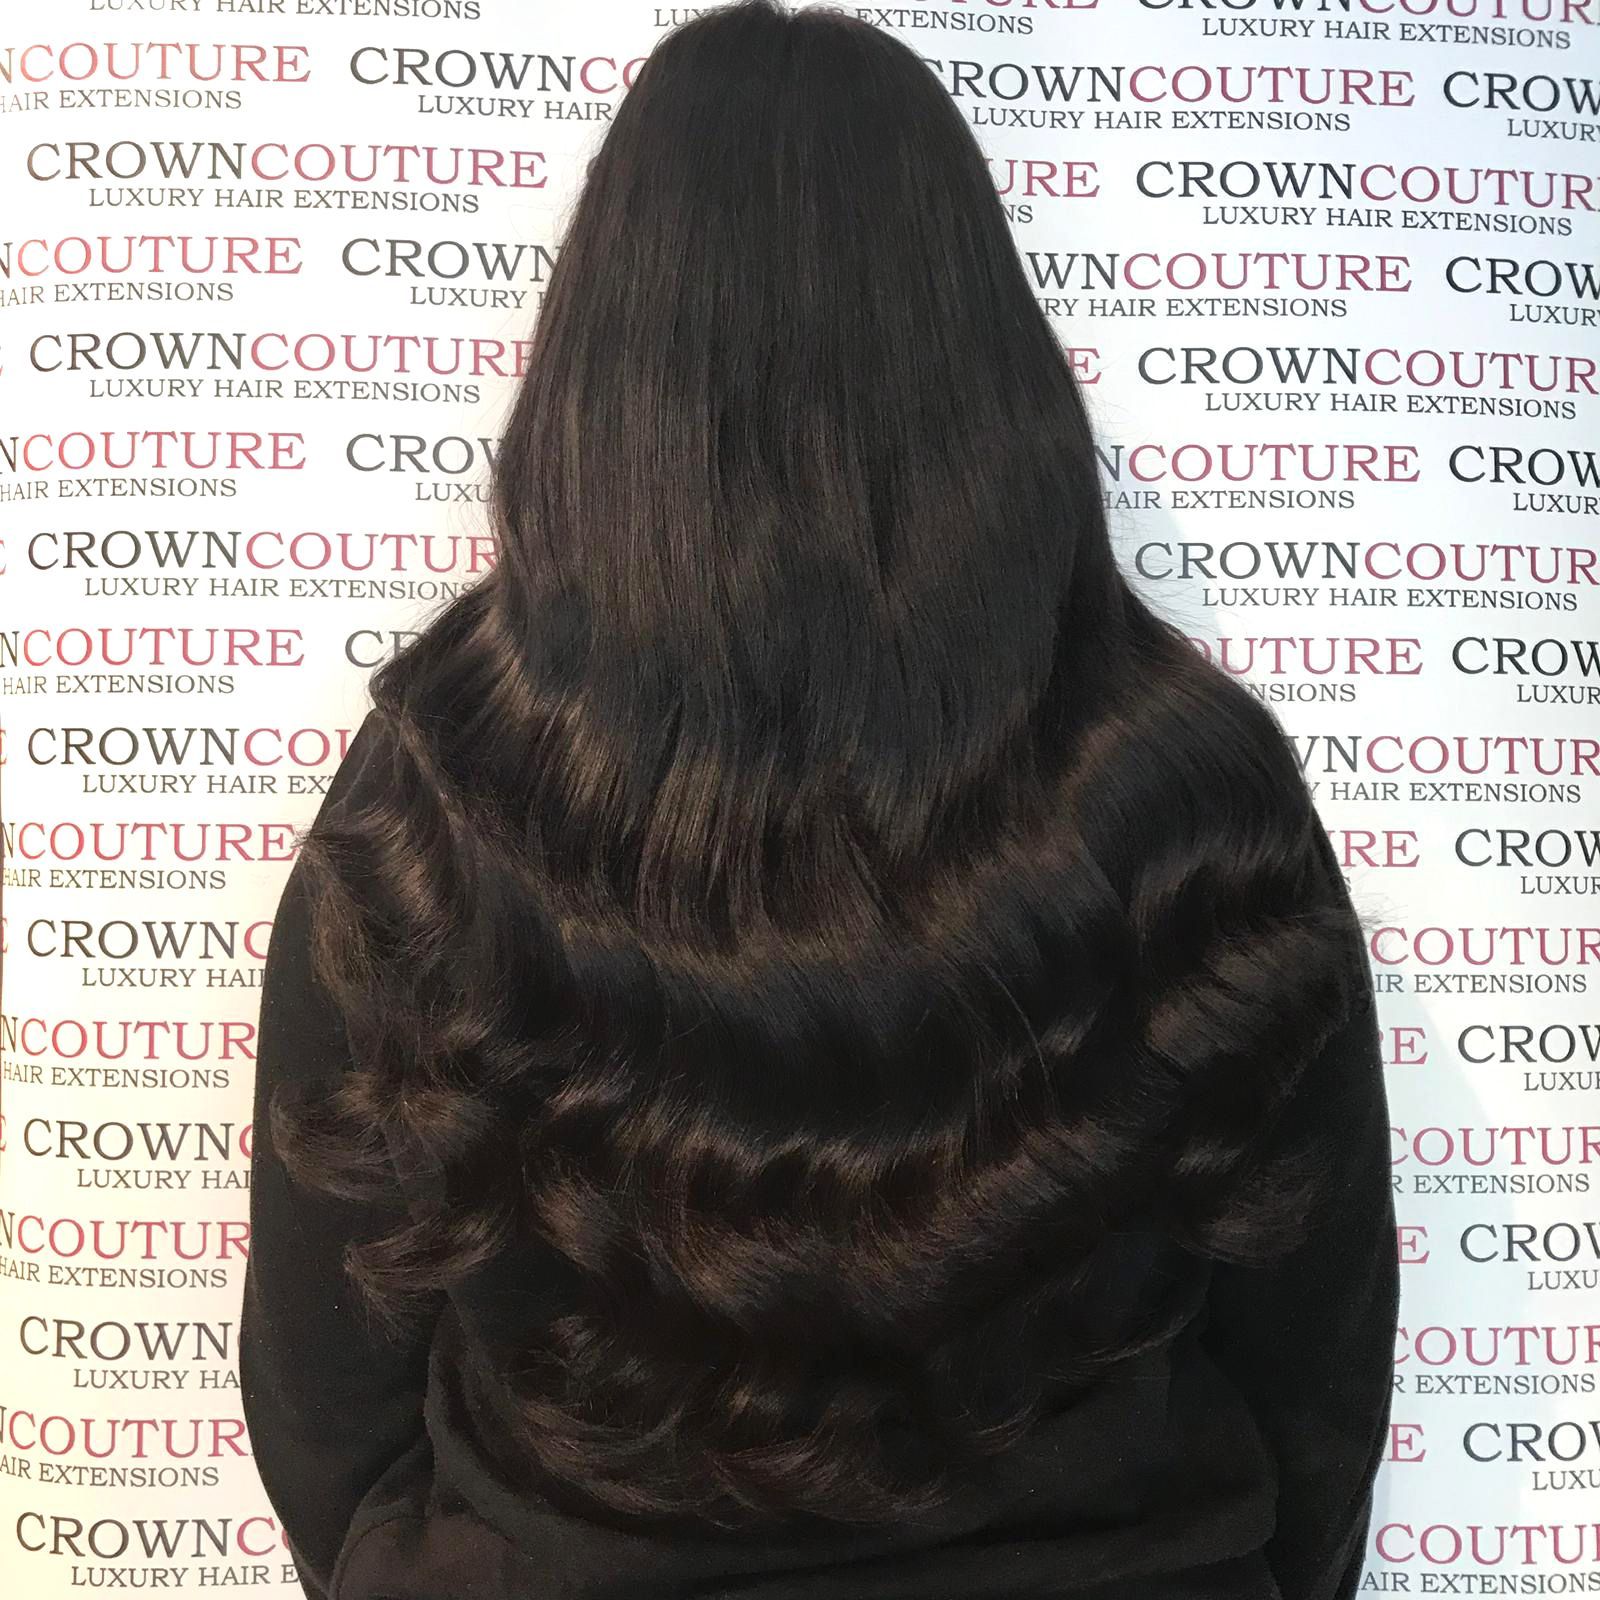 CrownCouture micro ring hair extensions